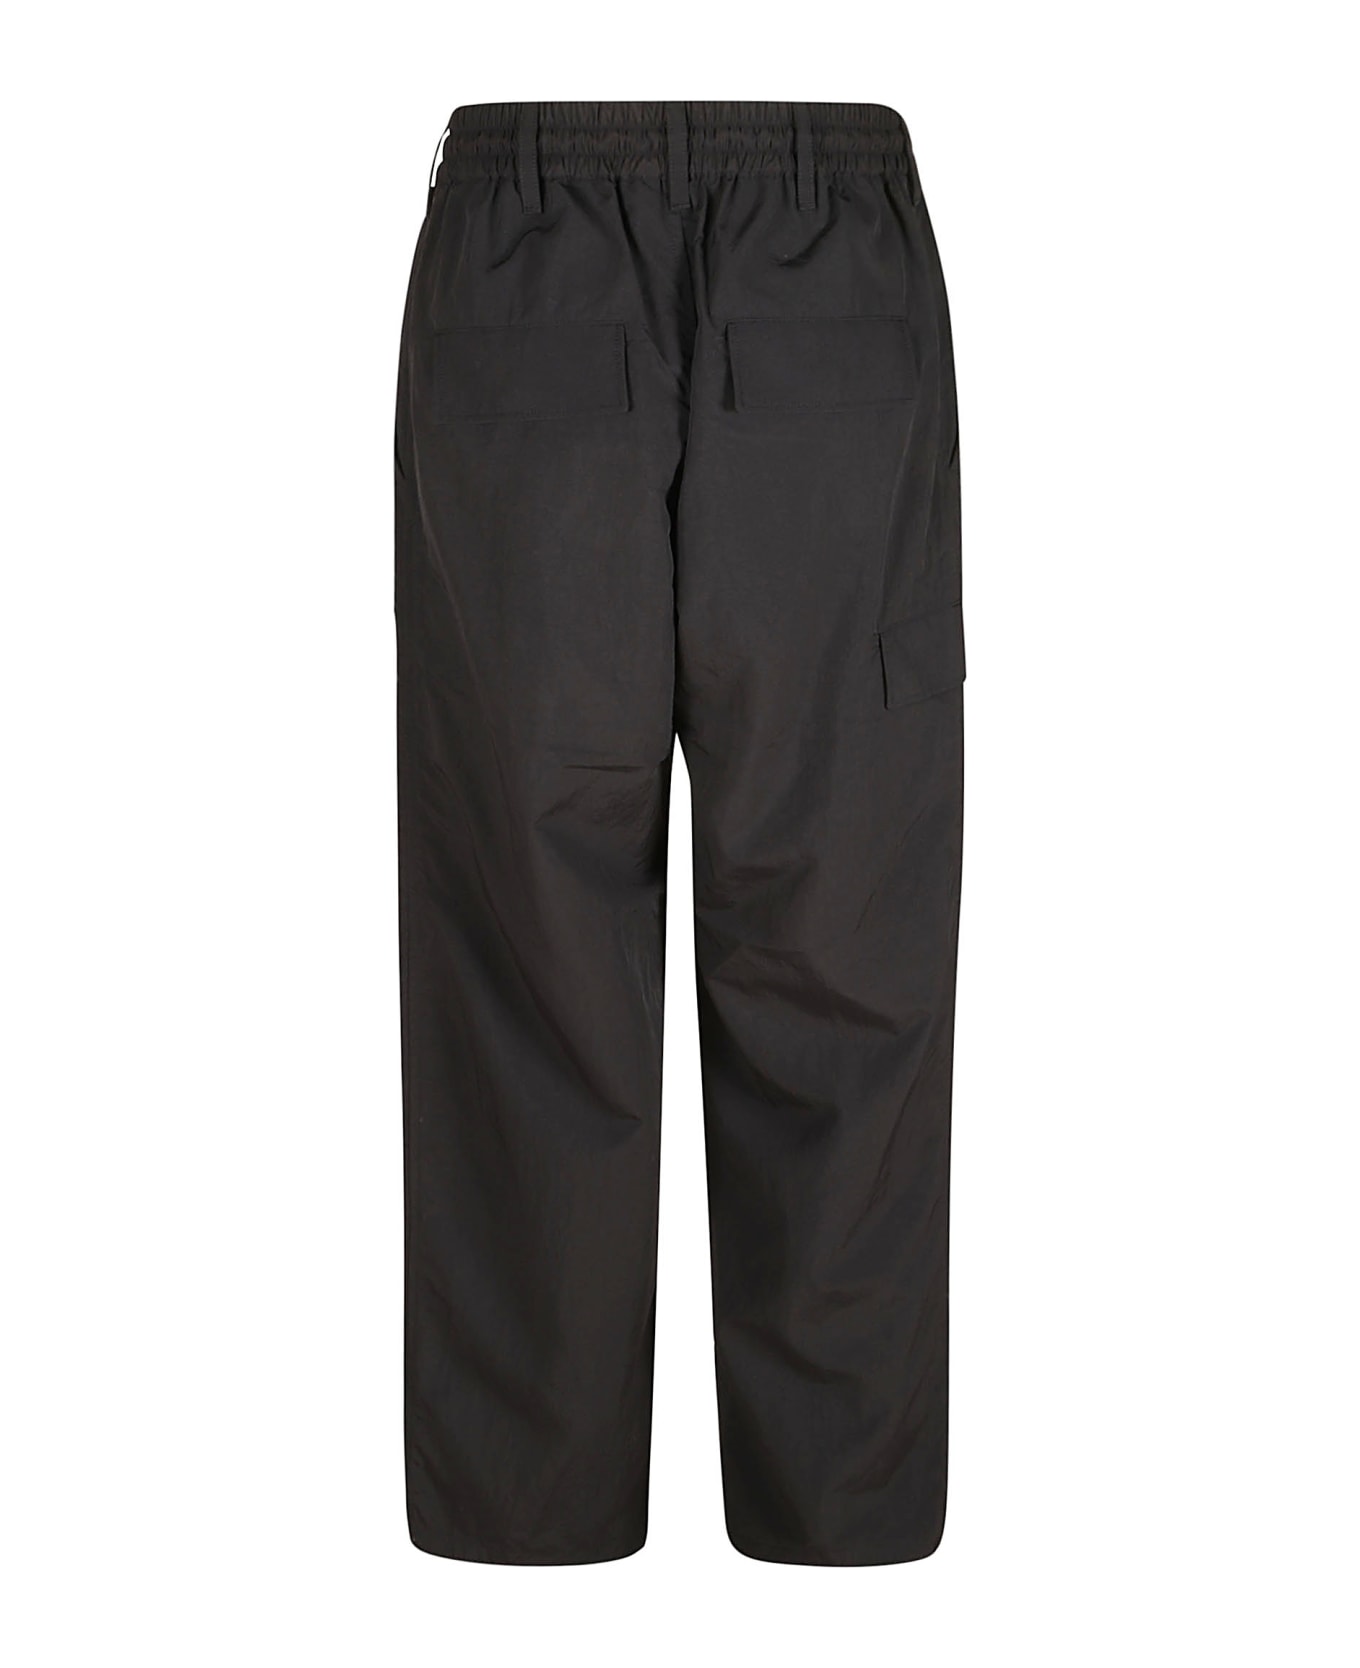 Y-3 Buttoned Cargo Trousers - Black